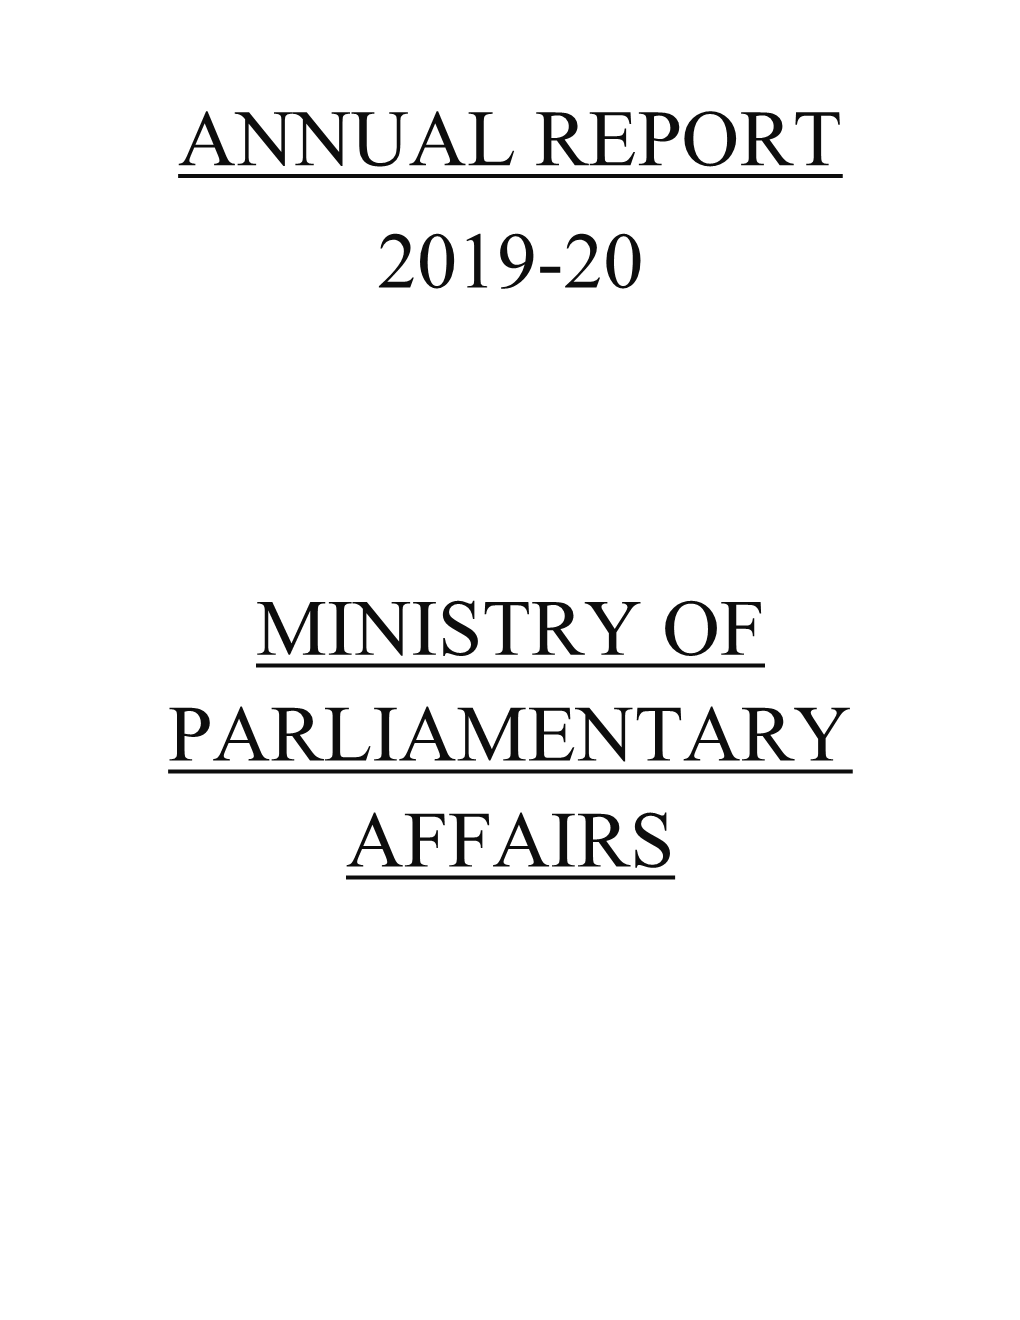 Annual Report 2019-20 Ministry of Parliamentary